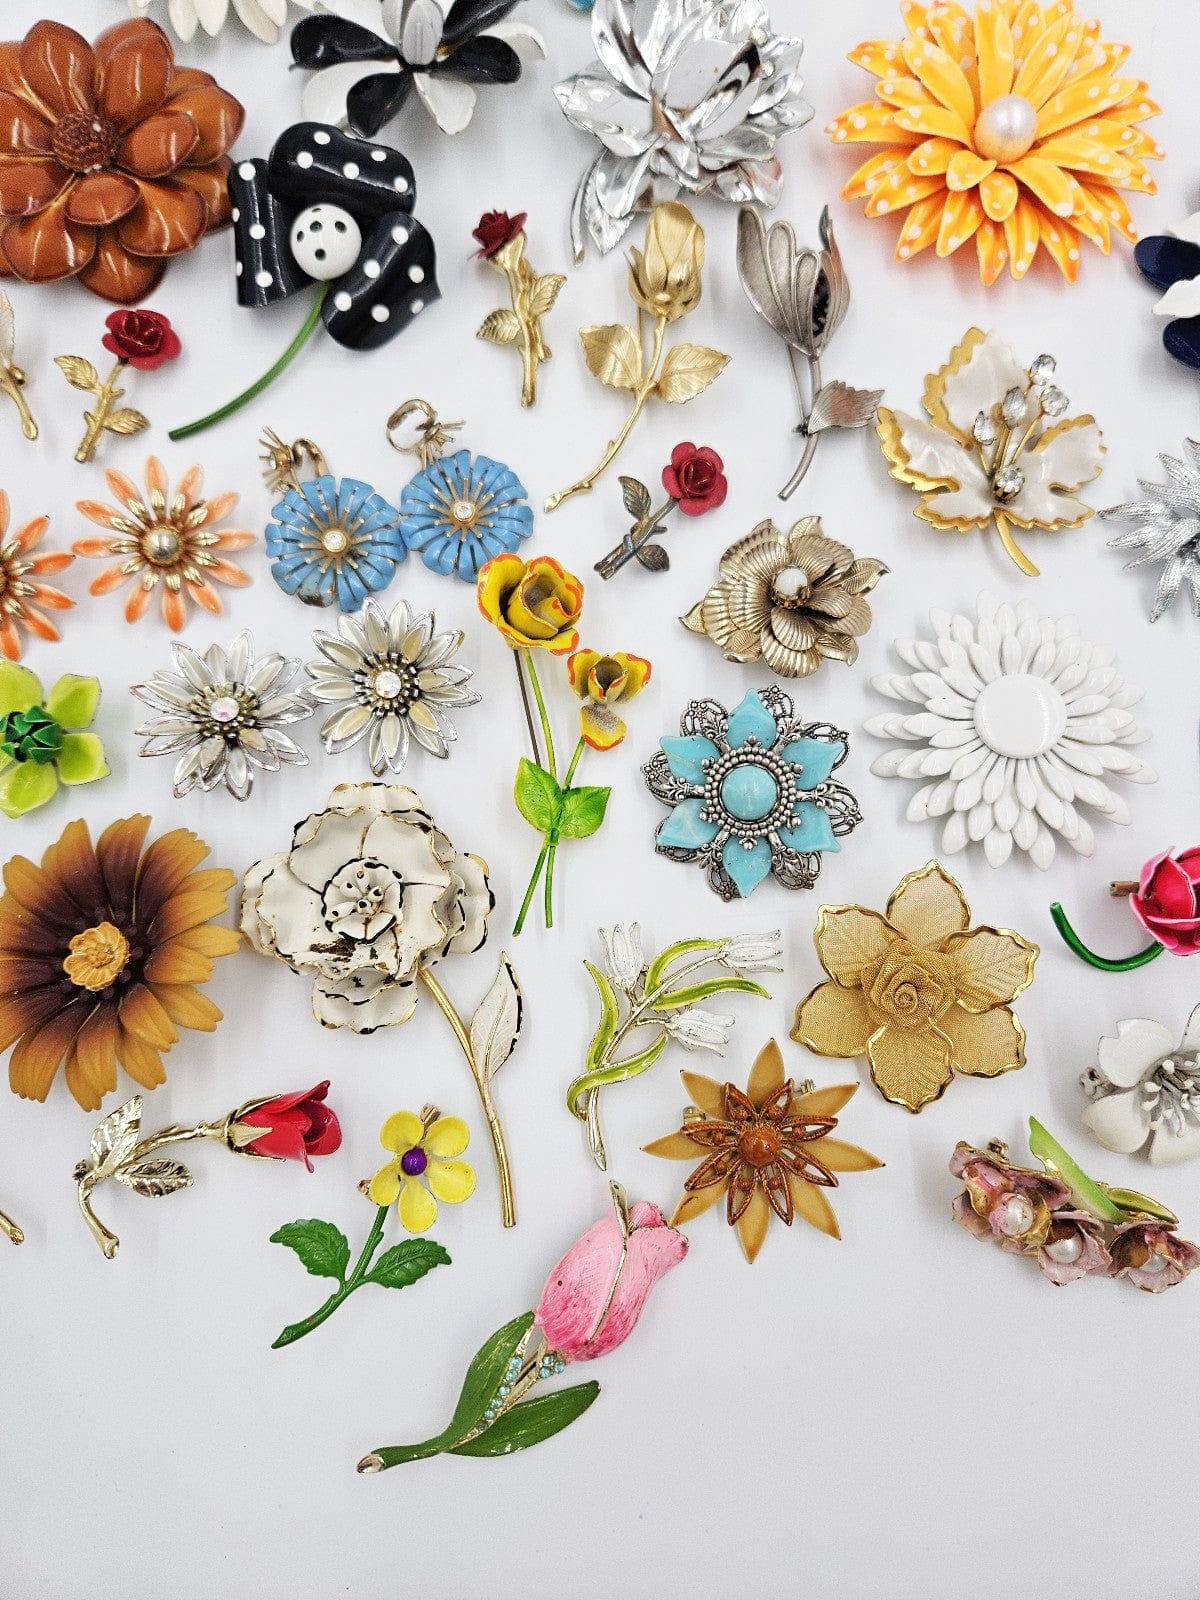 Costume Jewelry Flower Lot Jewelry 50/60's Flowers Brooches Earrings Large Lot Kramer Sarah C Park Lane Giovanni